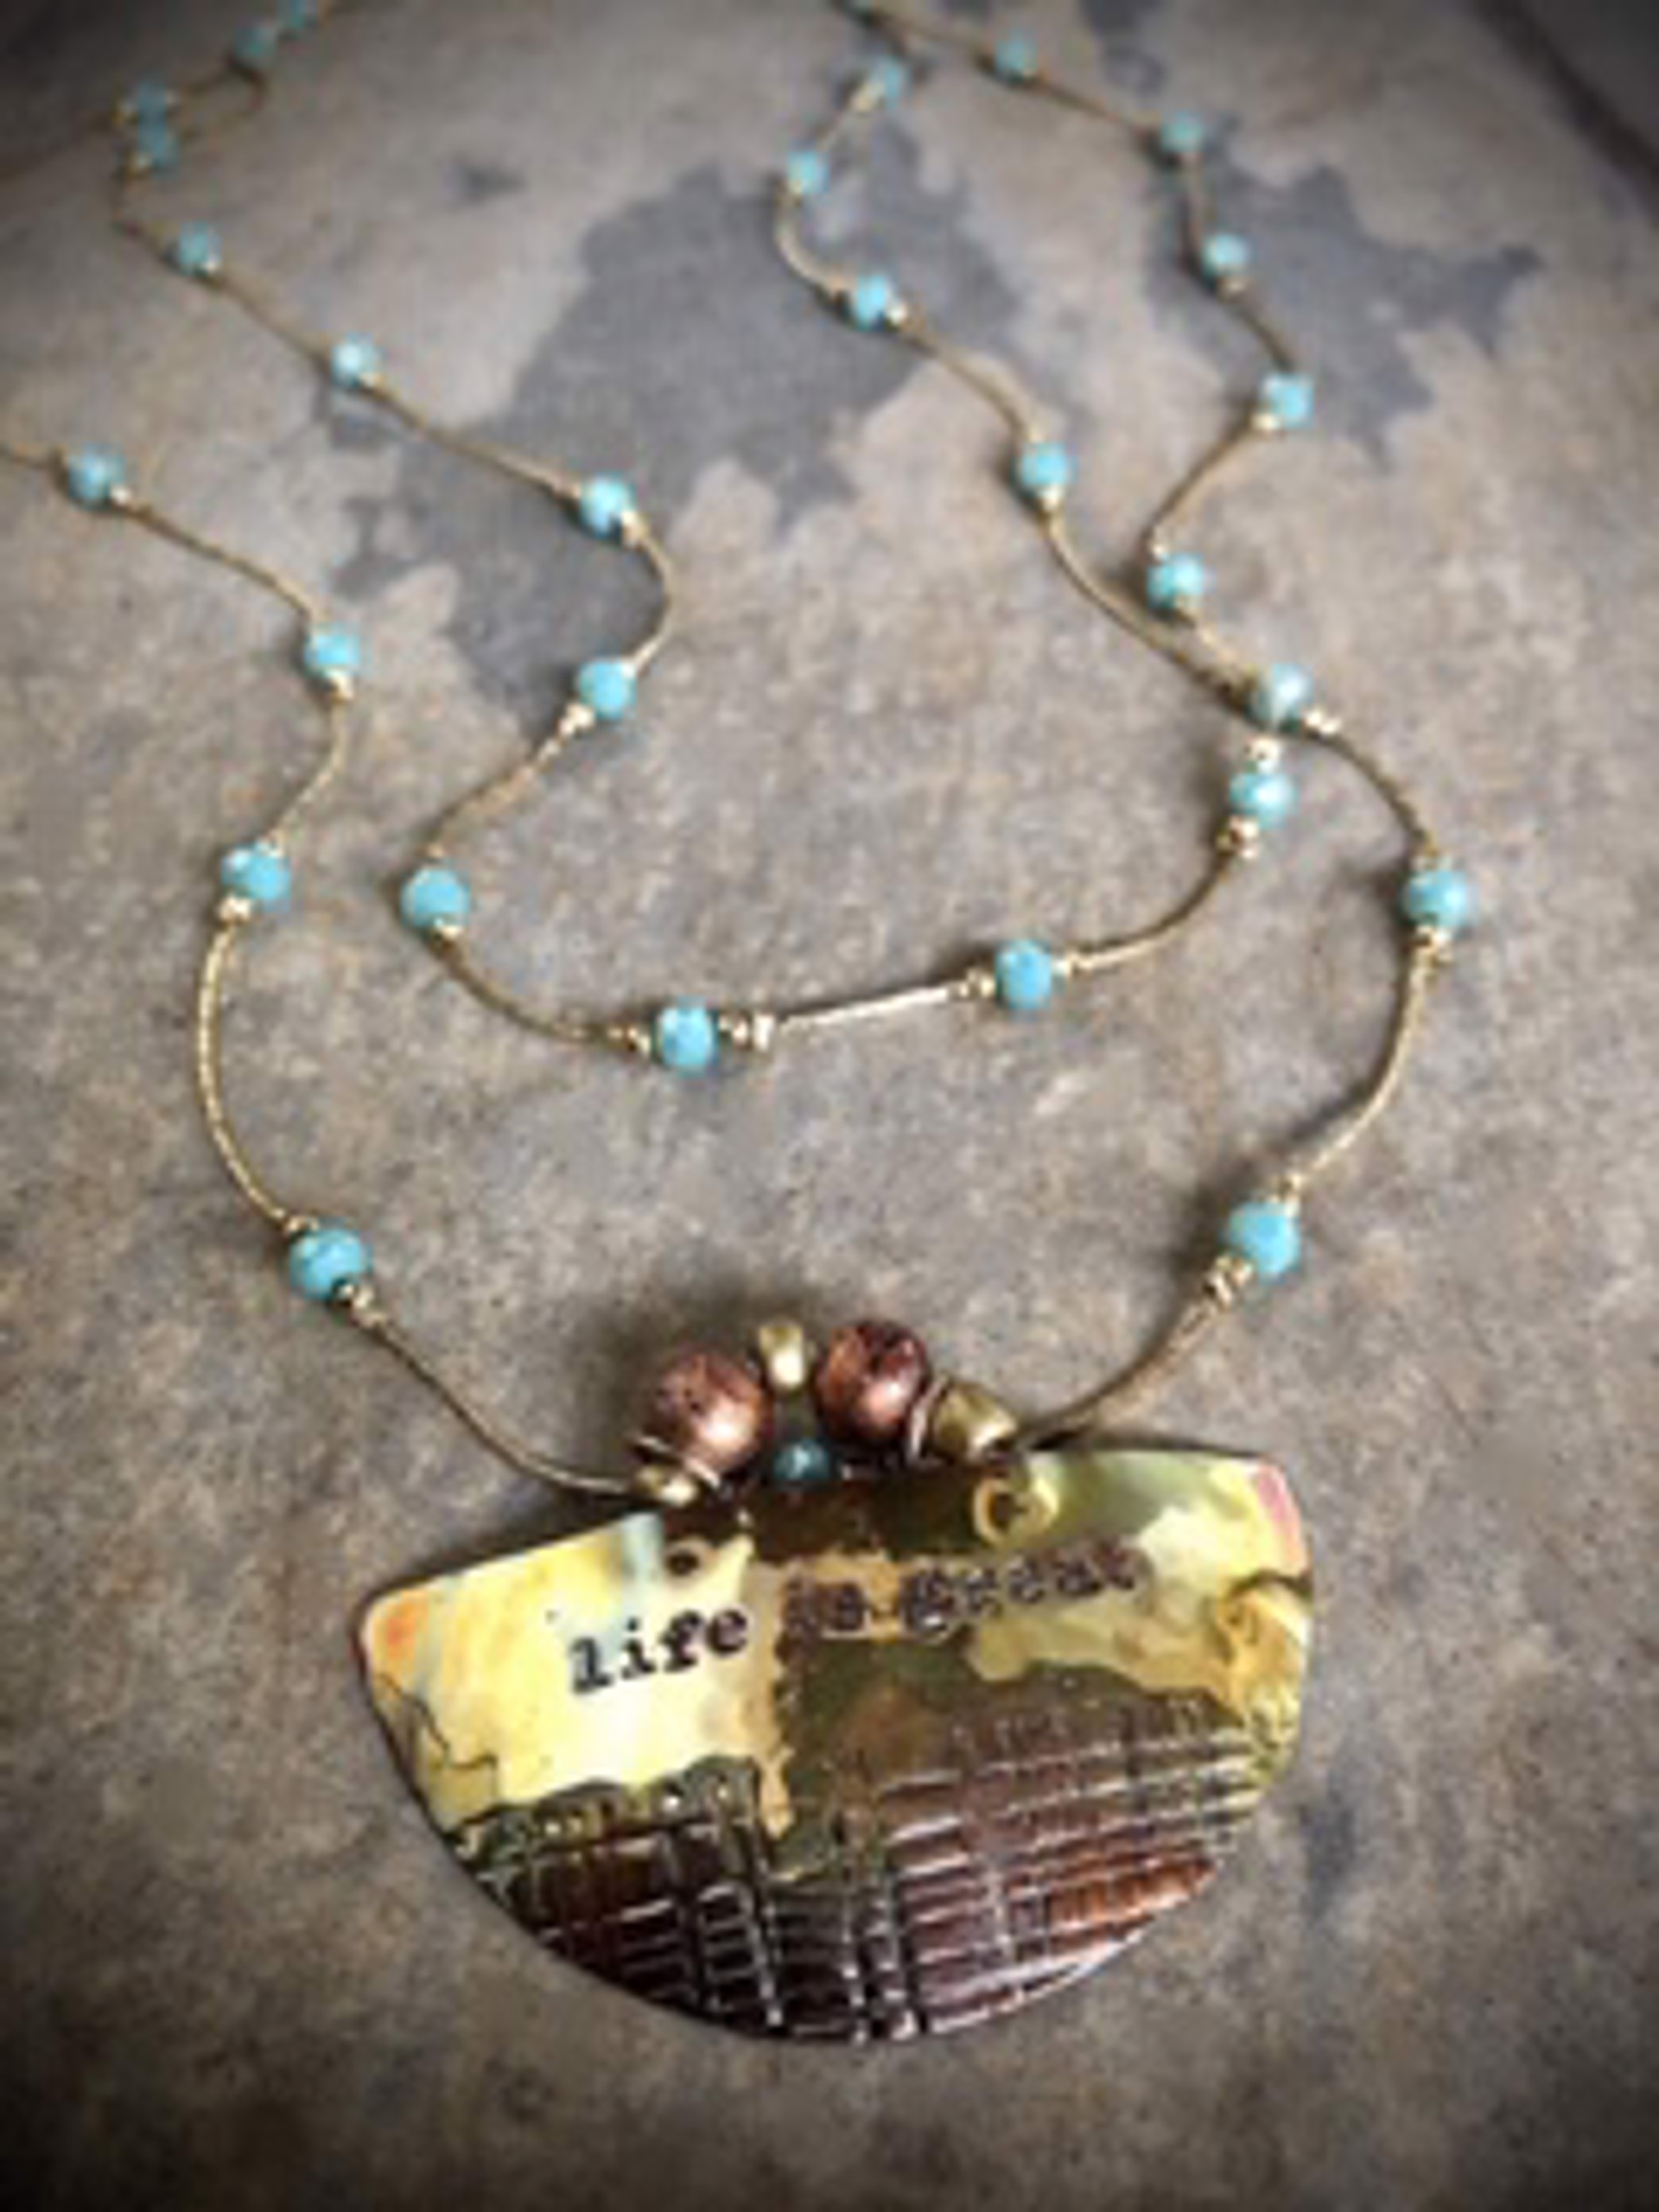 Necklace - "Life Is Great" 2 Strand Copper & Pearl Chain 16" - #2025 by Vesta Abel